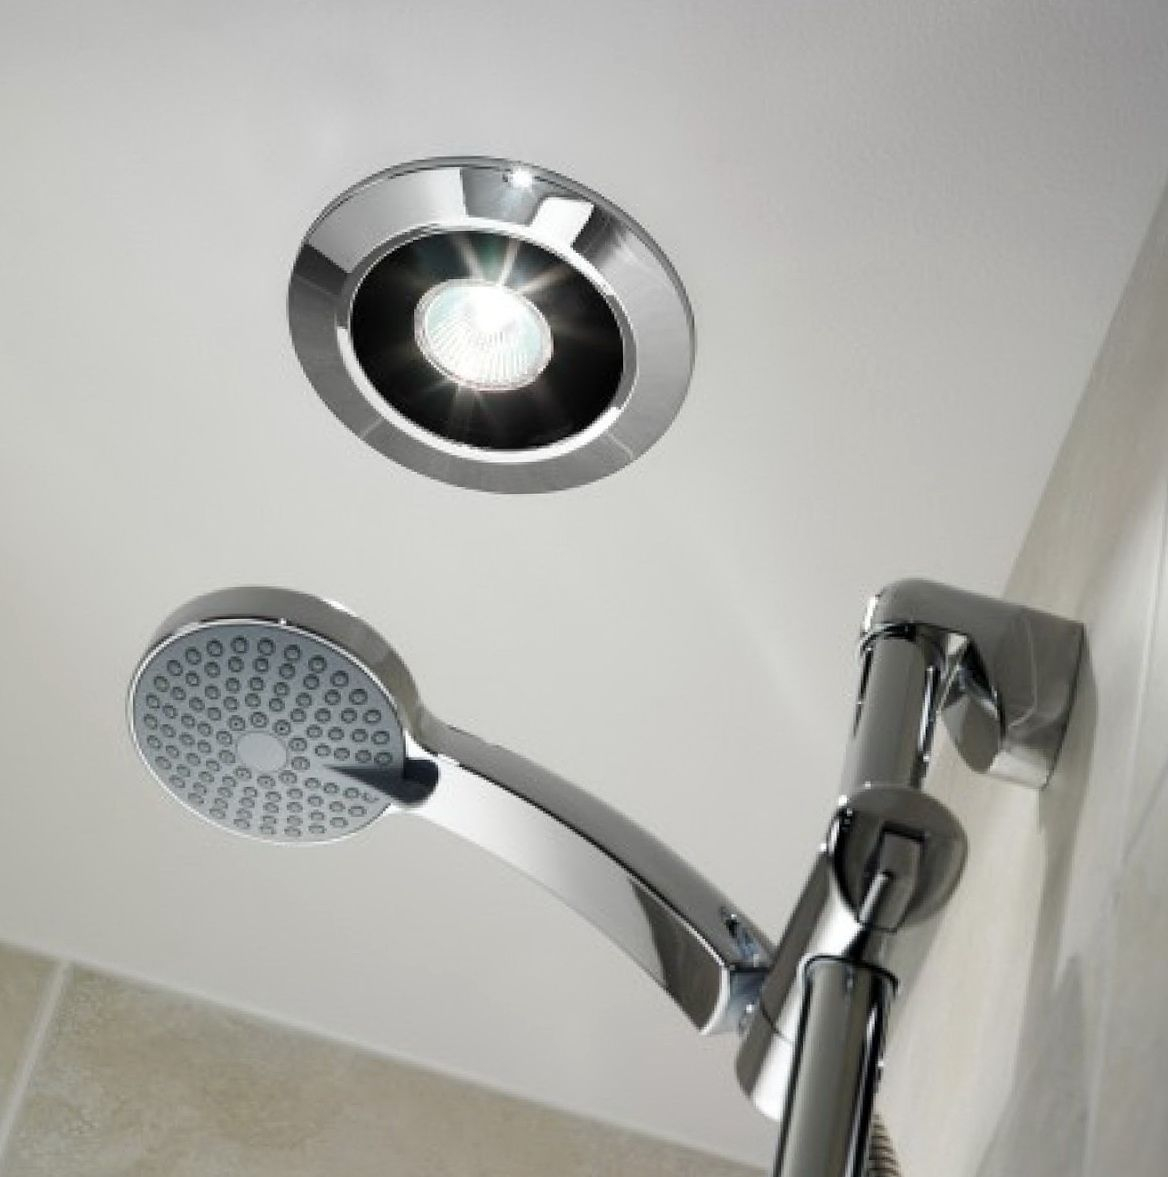 Best Quality Bathroom Extractor Fans Blogalways Bathroom within sizing 1168 X 1177